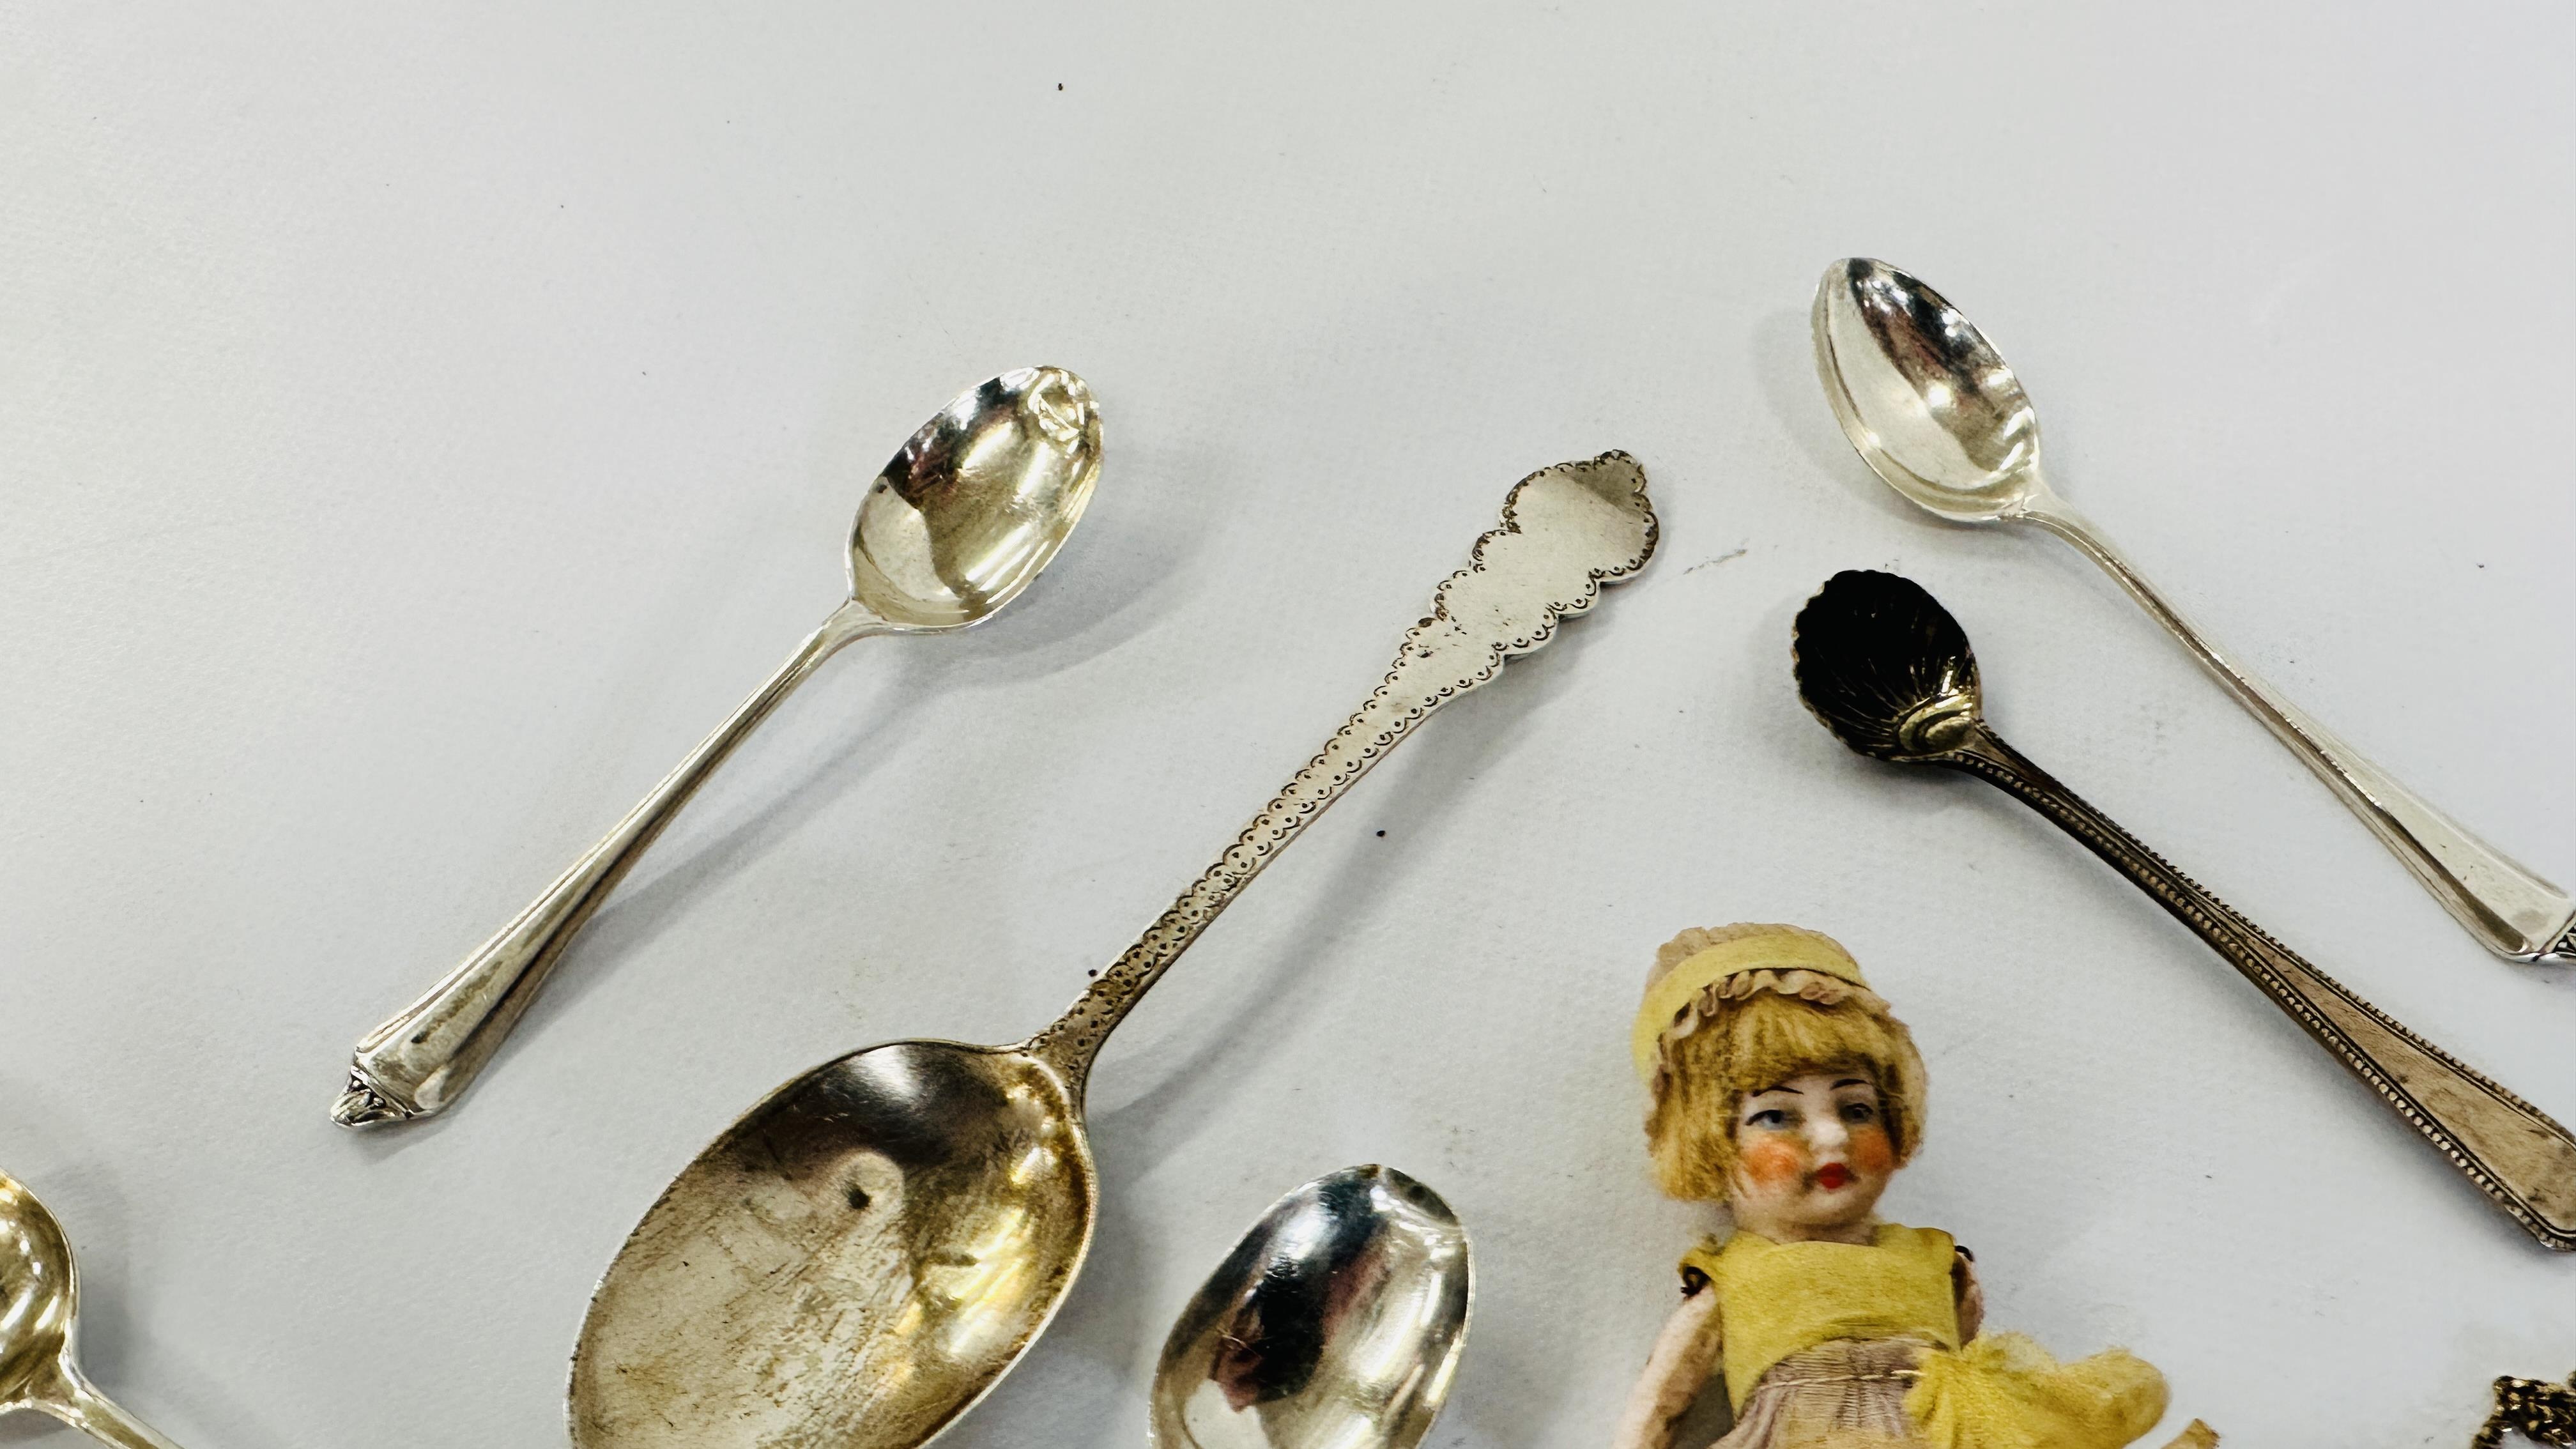 A GROUP OF 8 ASSORTED SILVER SPOONS, GILT SPIDER BROOCH ETC. AND A VINTAGE BISQUE MINIATURE DOLL. - Image 6 of 8